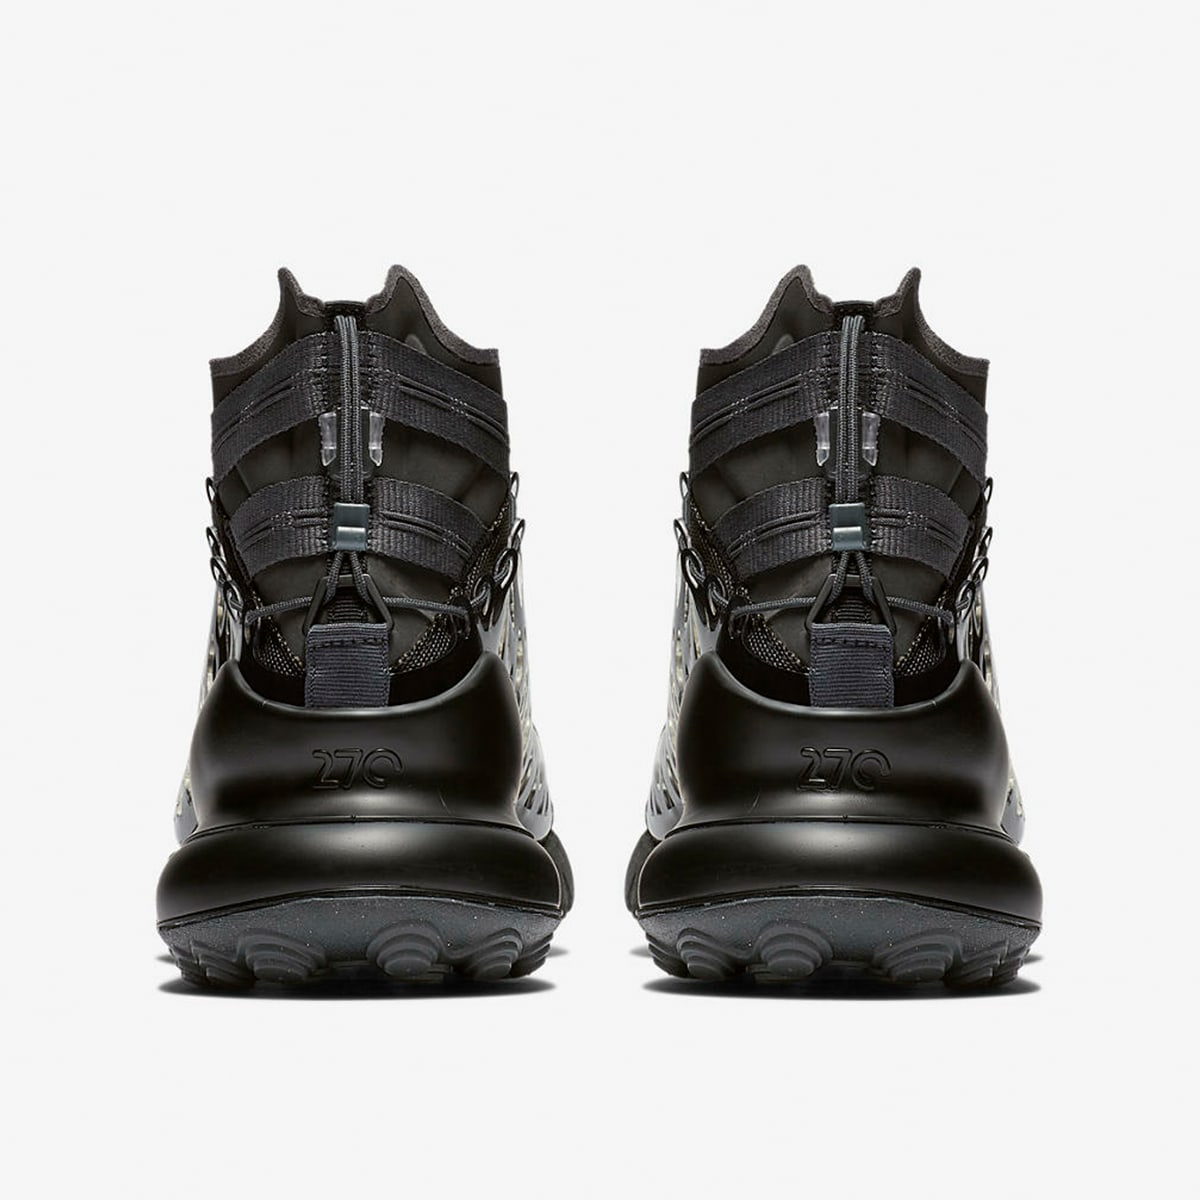 Nike Air Max 270 ISPA (Black & Anthracite) | END. Launches